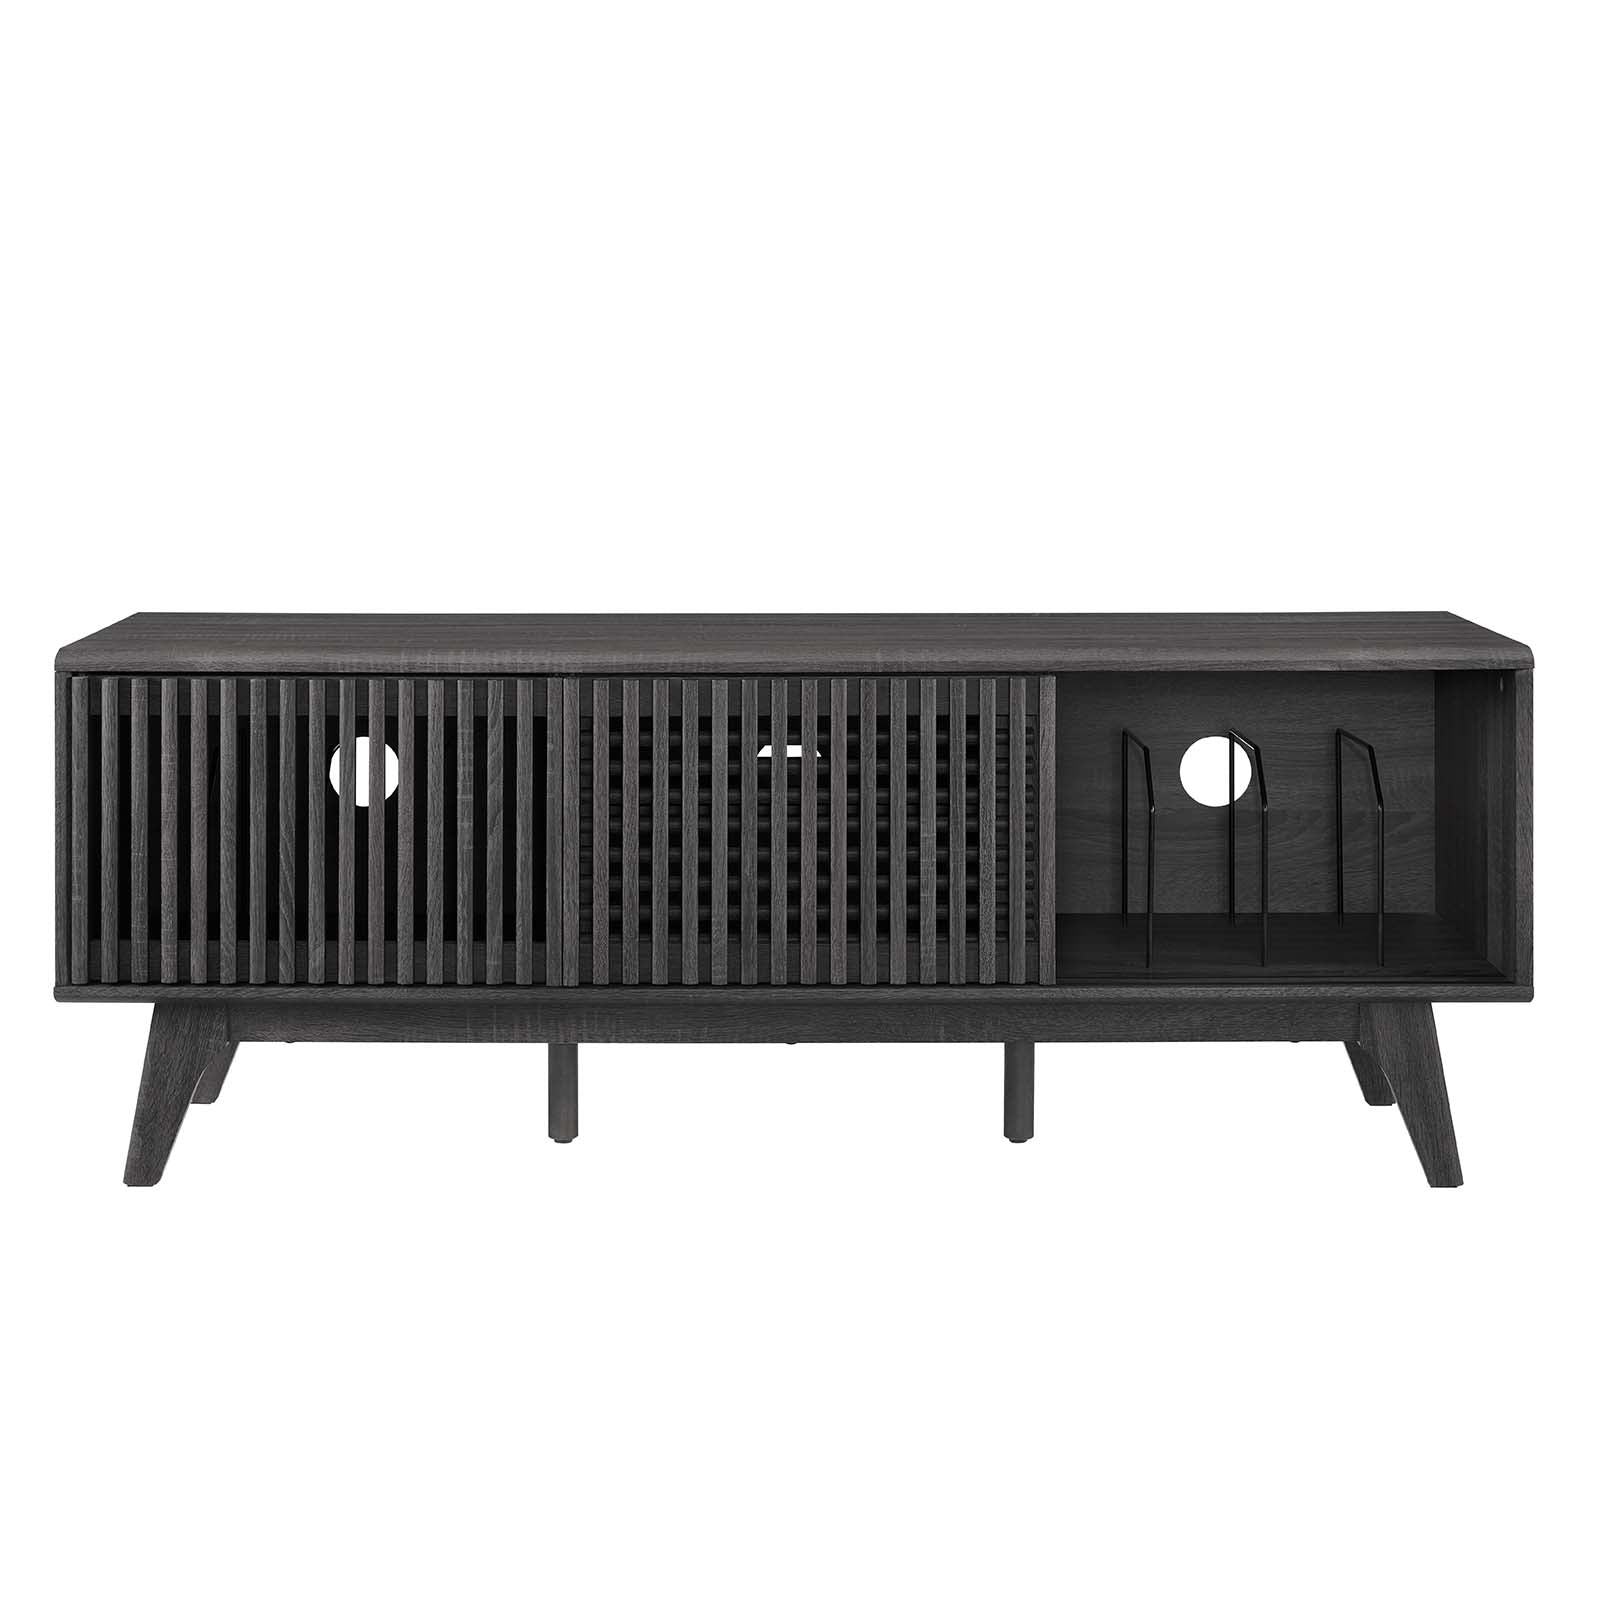 Iterate 59" TV Stand - East Shore Modern Home Furnishings